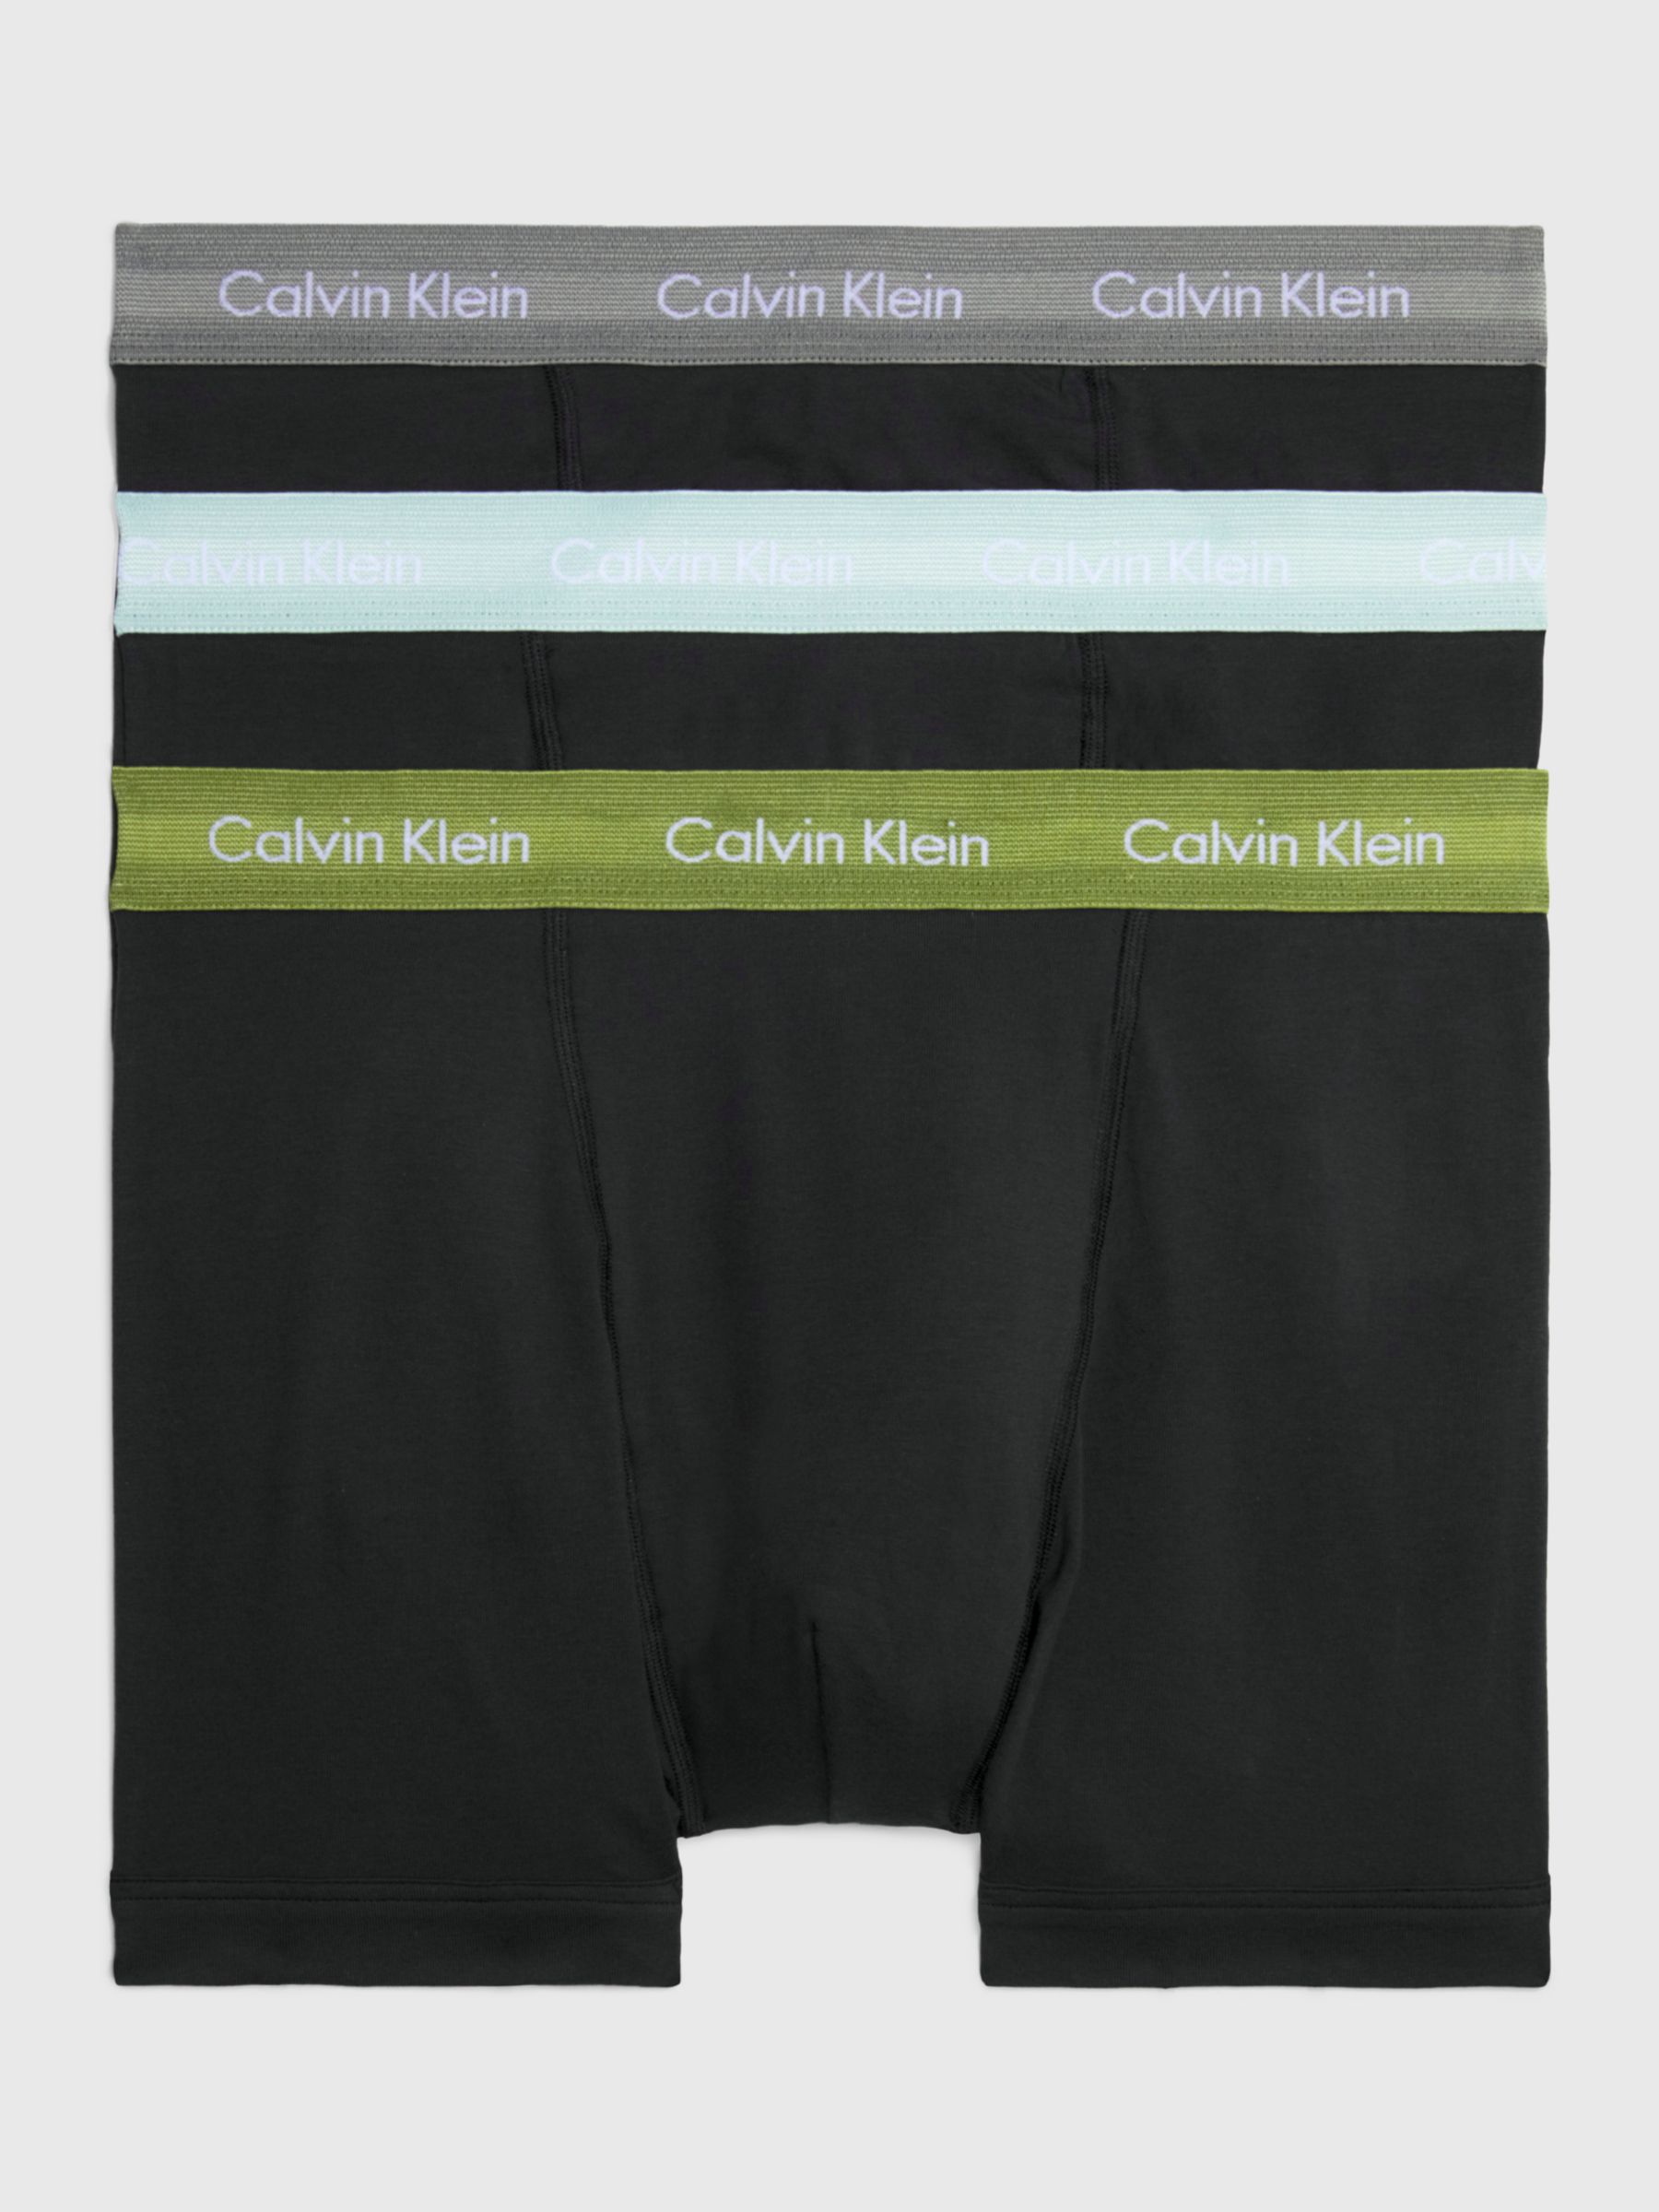 Calvin Klein Cotton Stretch Mid Rise Trunks, Pack of 3, Black/Olive/Grey, S